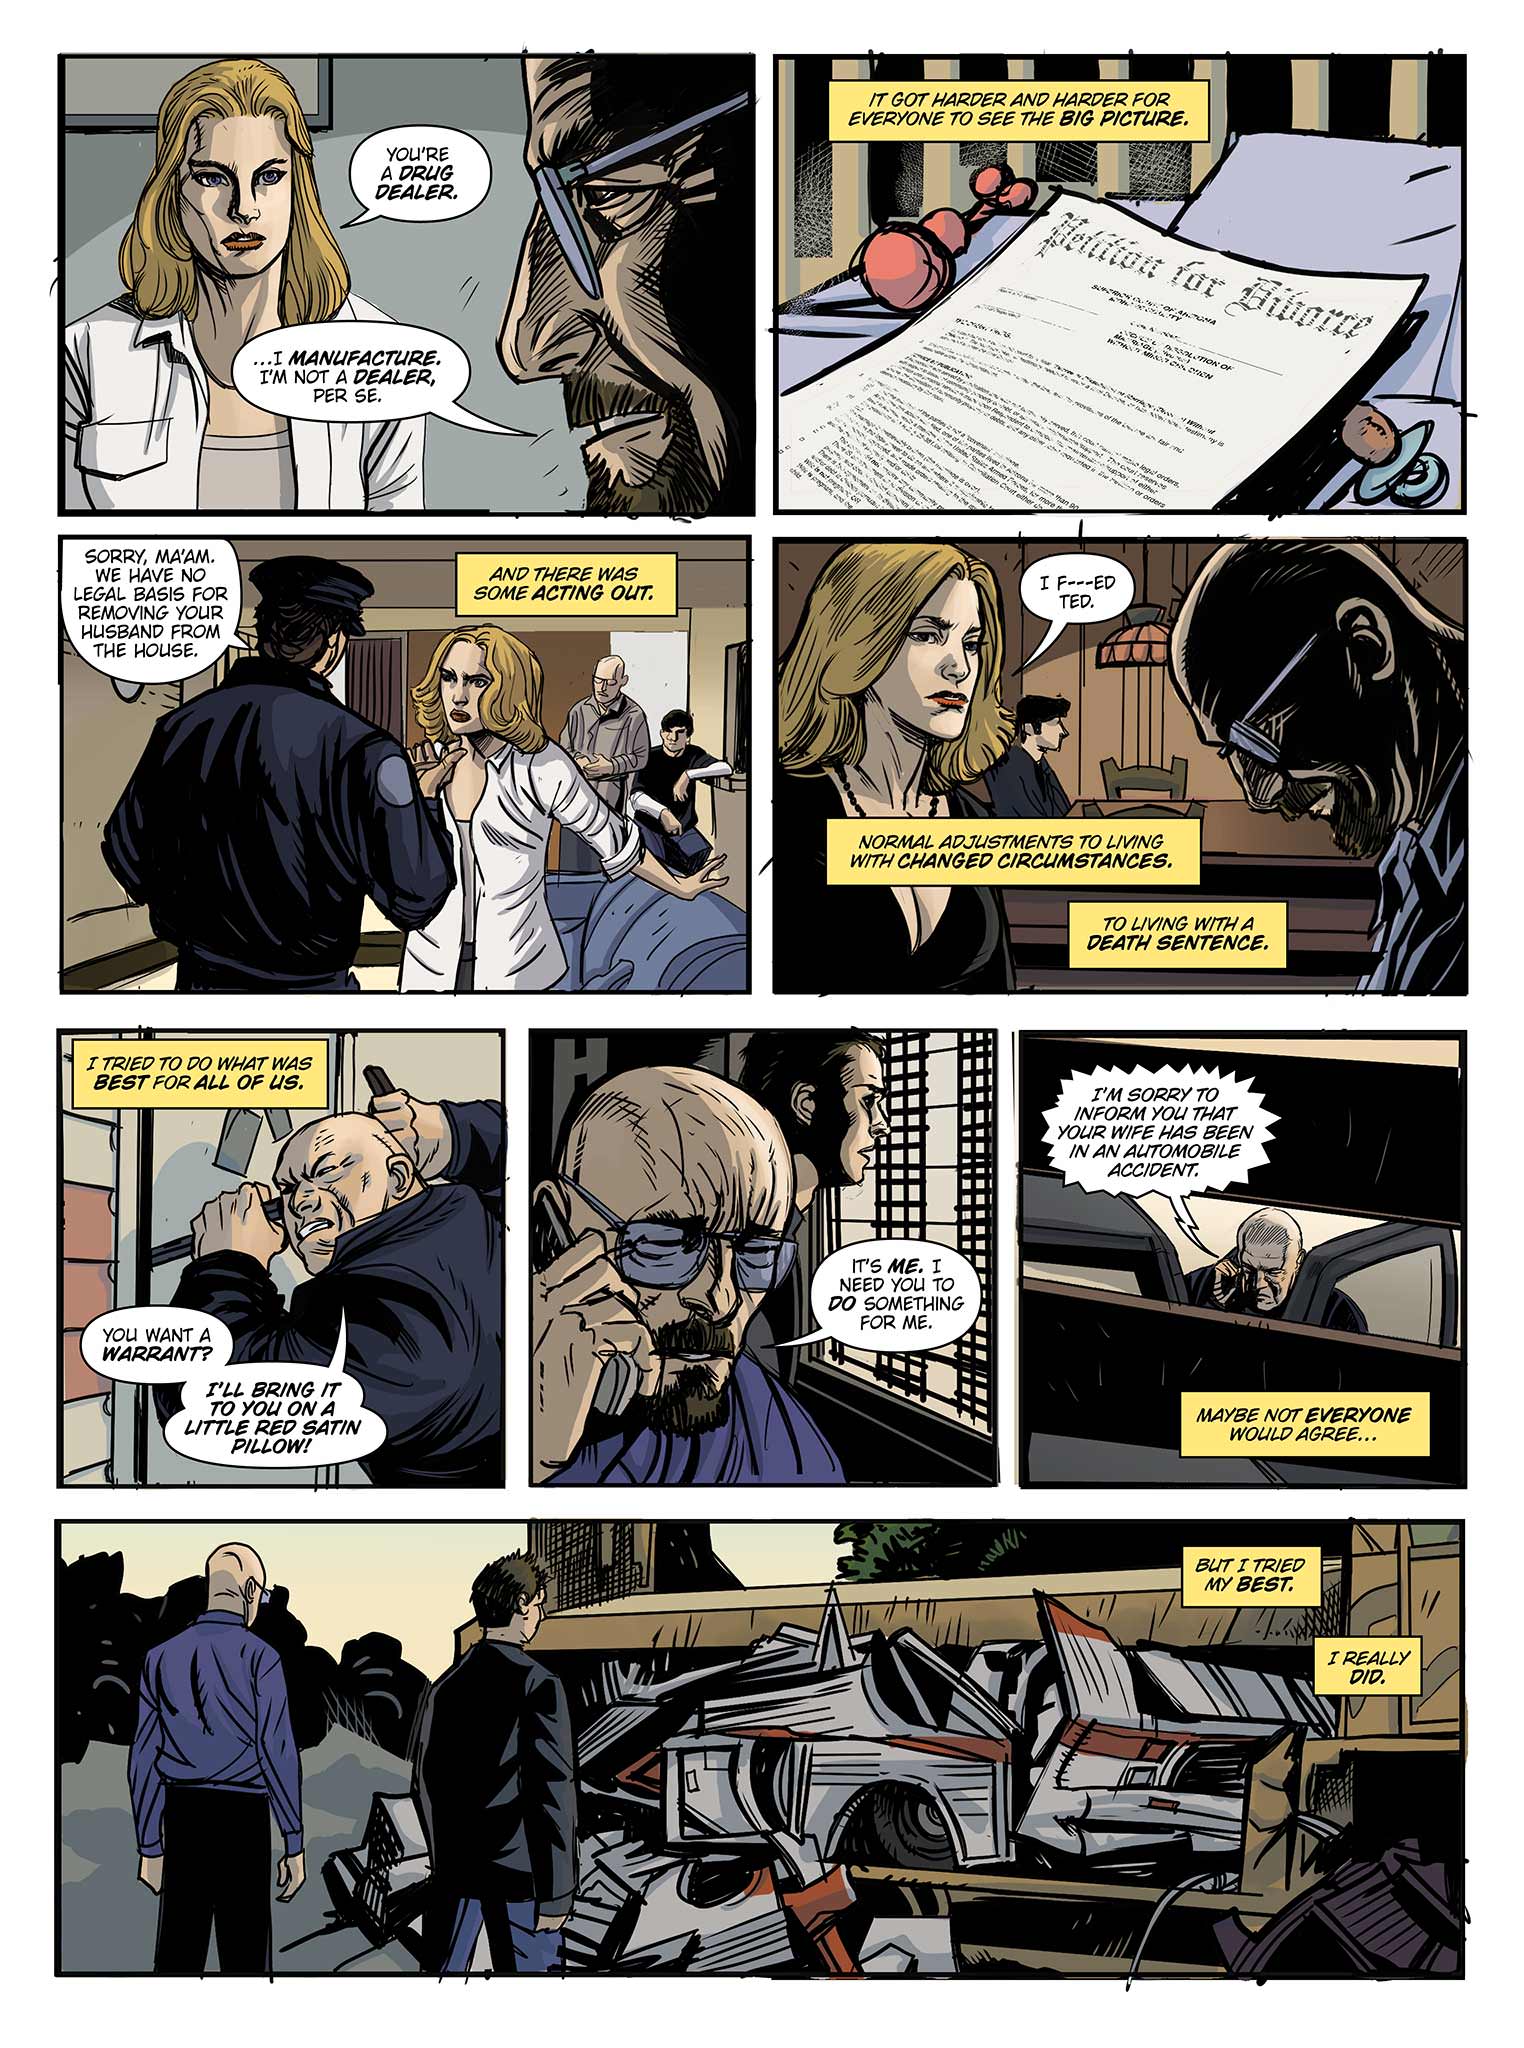 Read online Breaking Bad: All Bad Things comic -  Issue # Full - 10